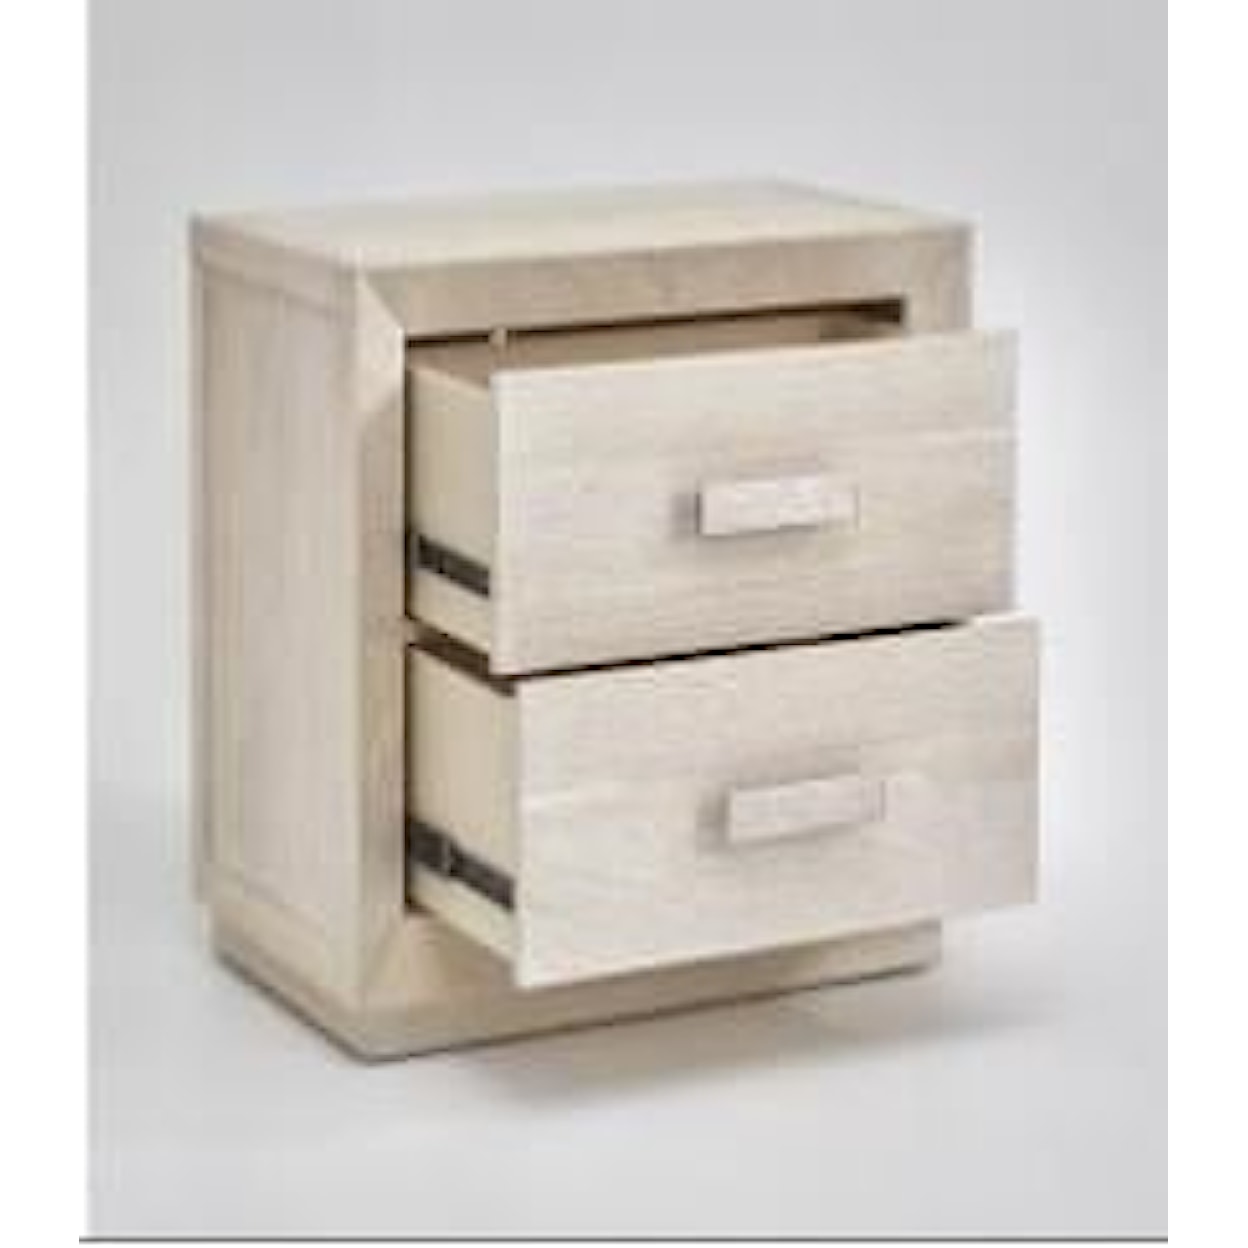 Esprit Decor Home Collection Pacific Collection 2 Drawer Nightstand